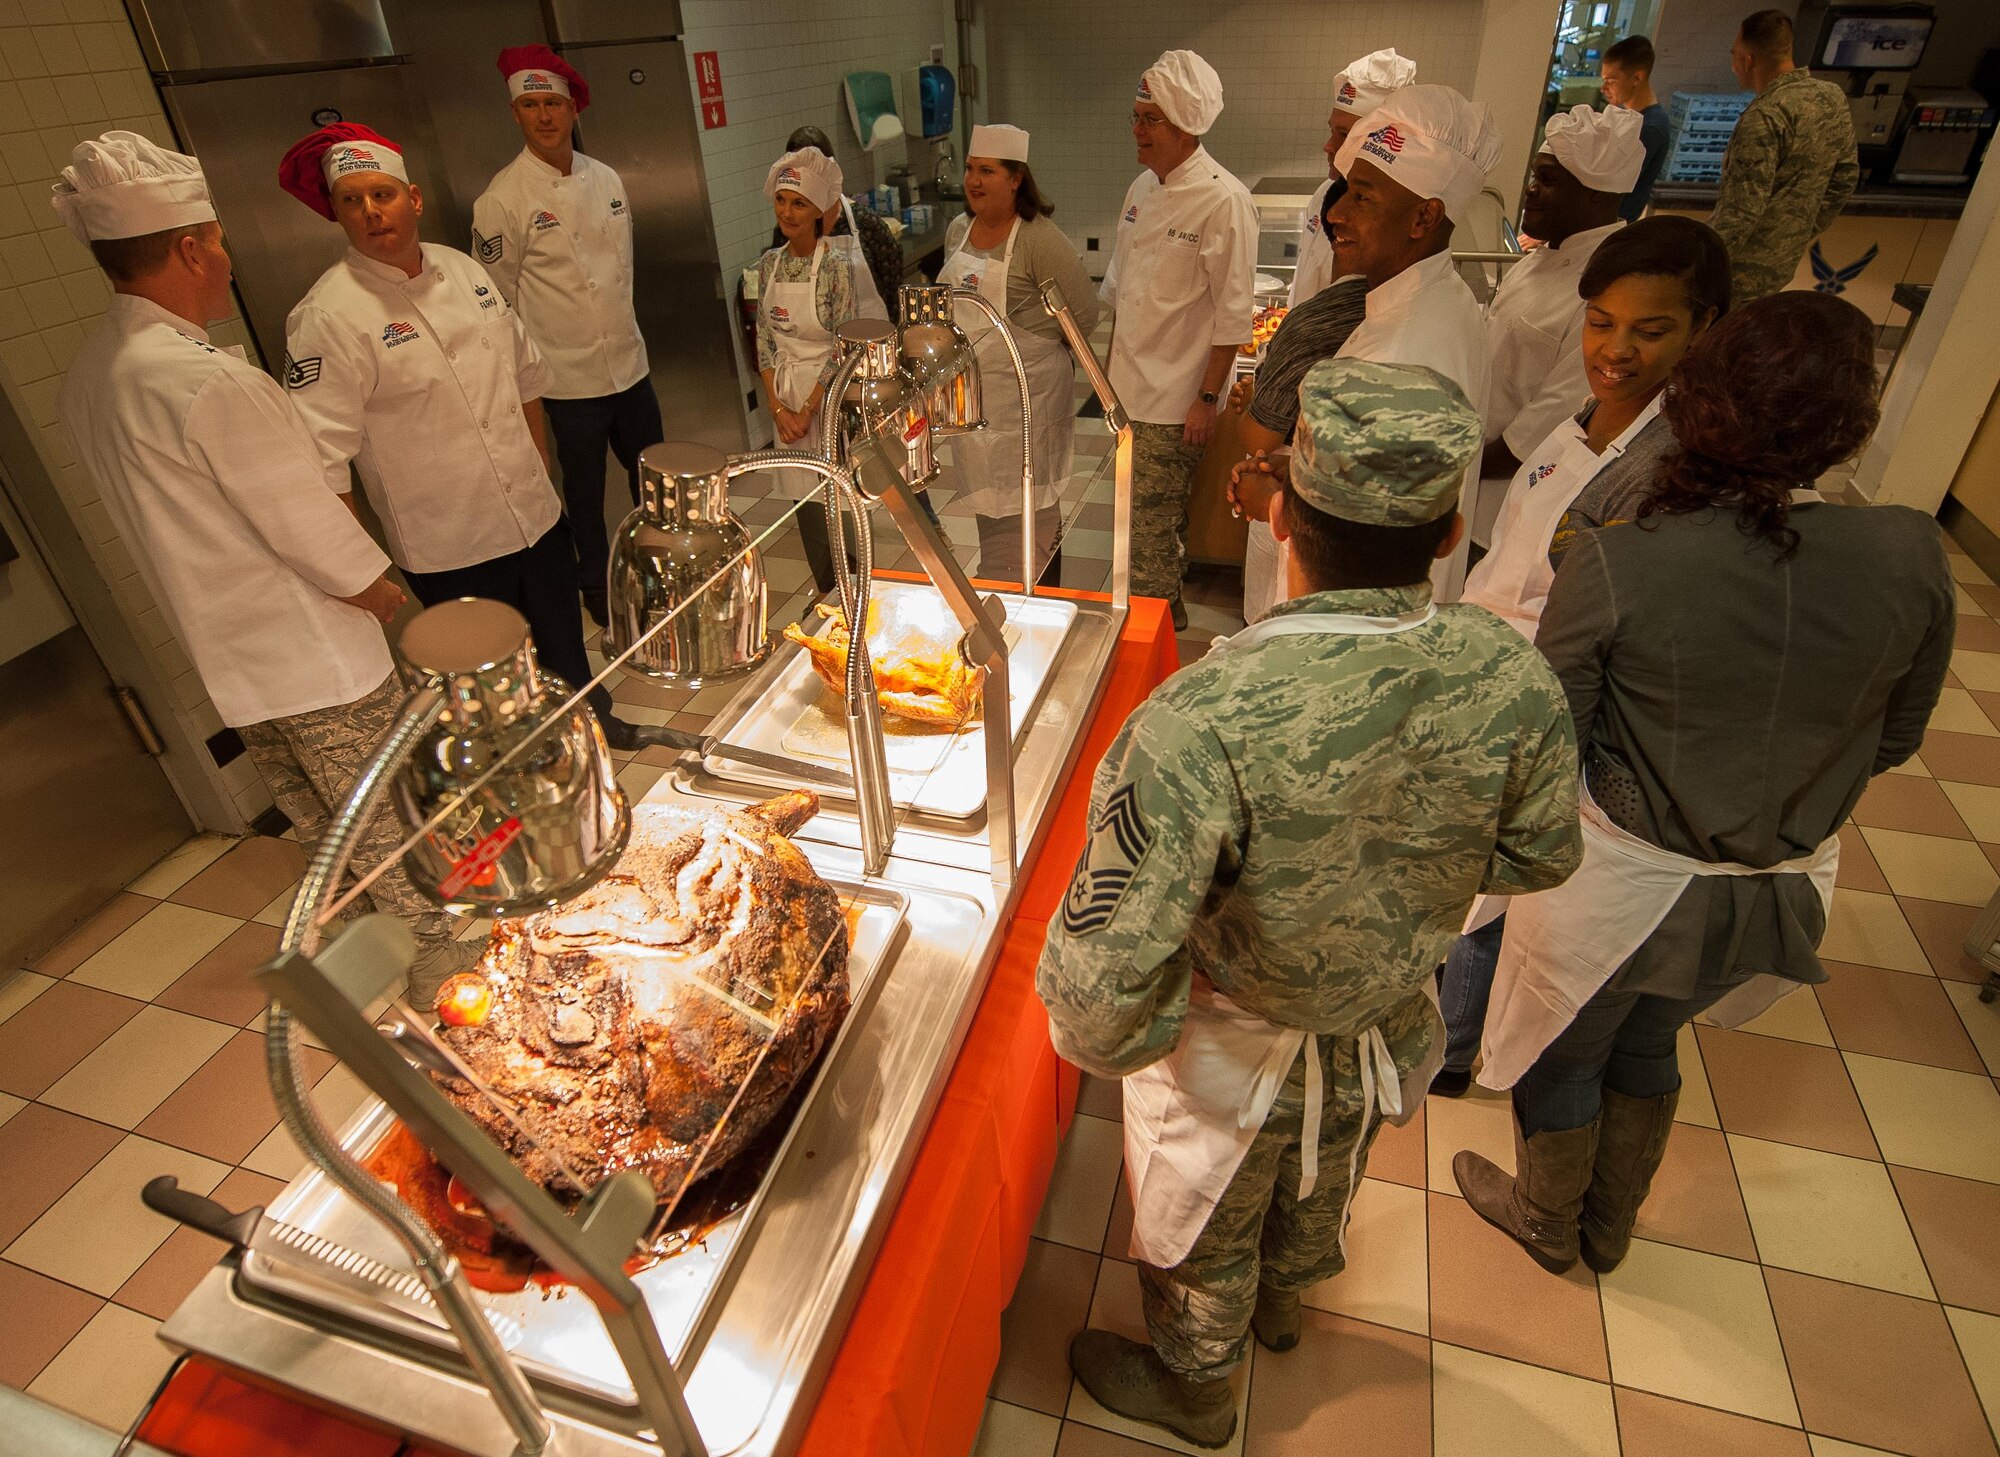 Ramstein leadership meet with the Rheinland Inn Dining Facility staff before Airmen eat during a Thanksgiving meal at Ramstein Air Base, Germany, Nov. 24, 2016. Every year at Ramstein, leadership across the Kaiserslautern Military Community visits the base’s dining facility to cook food and meet Airmen during Thanksgiving. In the U.S., the modern Thanksgiving holiday tradition can trace its origins back to 1621 in the heart of a newly-founded city called Plymouth in present-day Massachusetts. However, the first nationwide Thanksgiving proclamation was made by the first president of the U.S., George Washington, in 1789. Since then, the holiday has been celebrated by an entire nation to recount the blessings of the year. (U.S. Air Force photo by Airman 1st Class Lane T. Plummer)